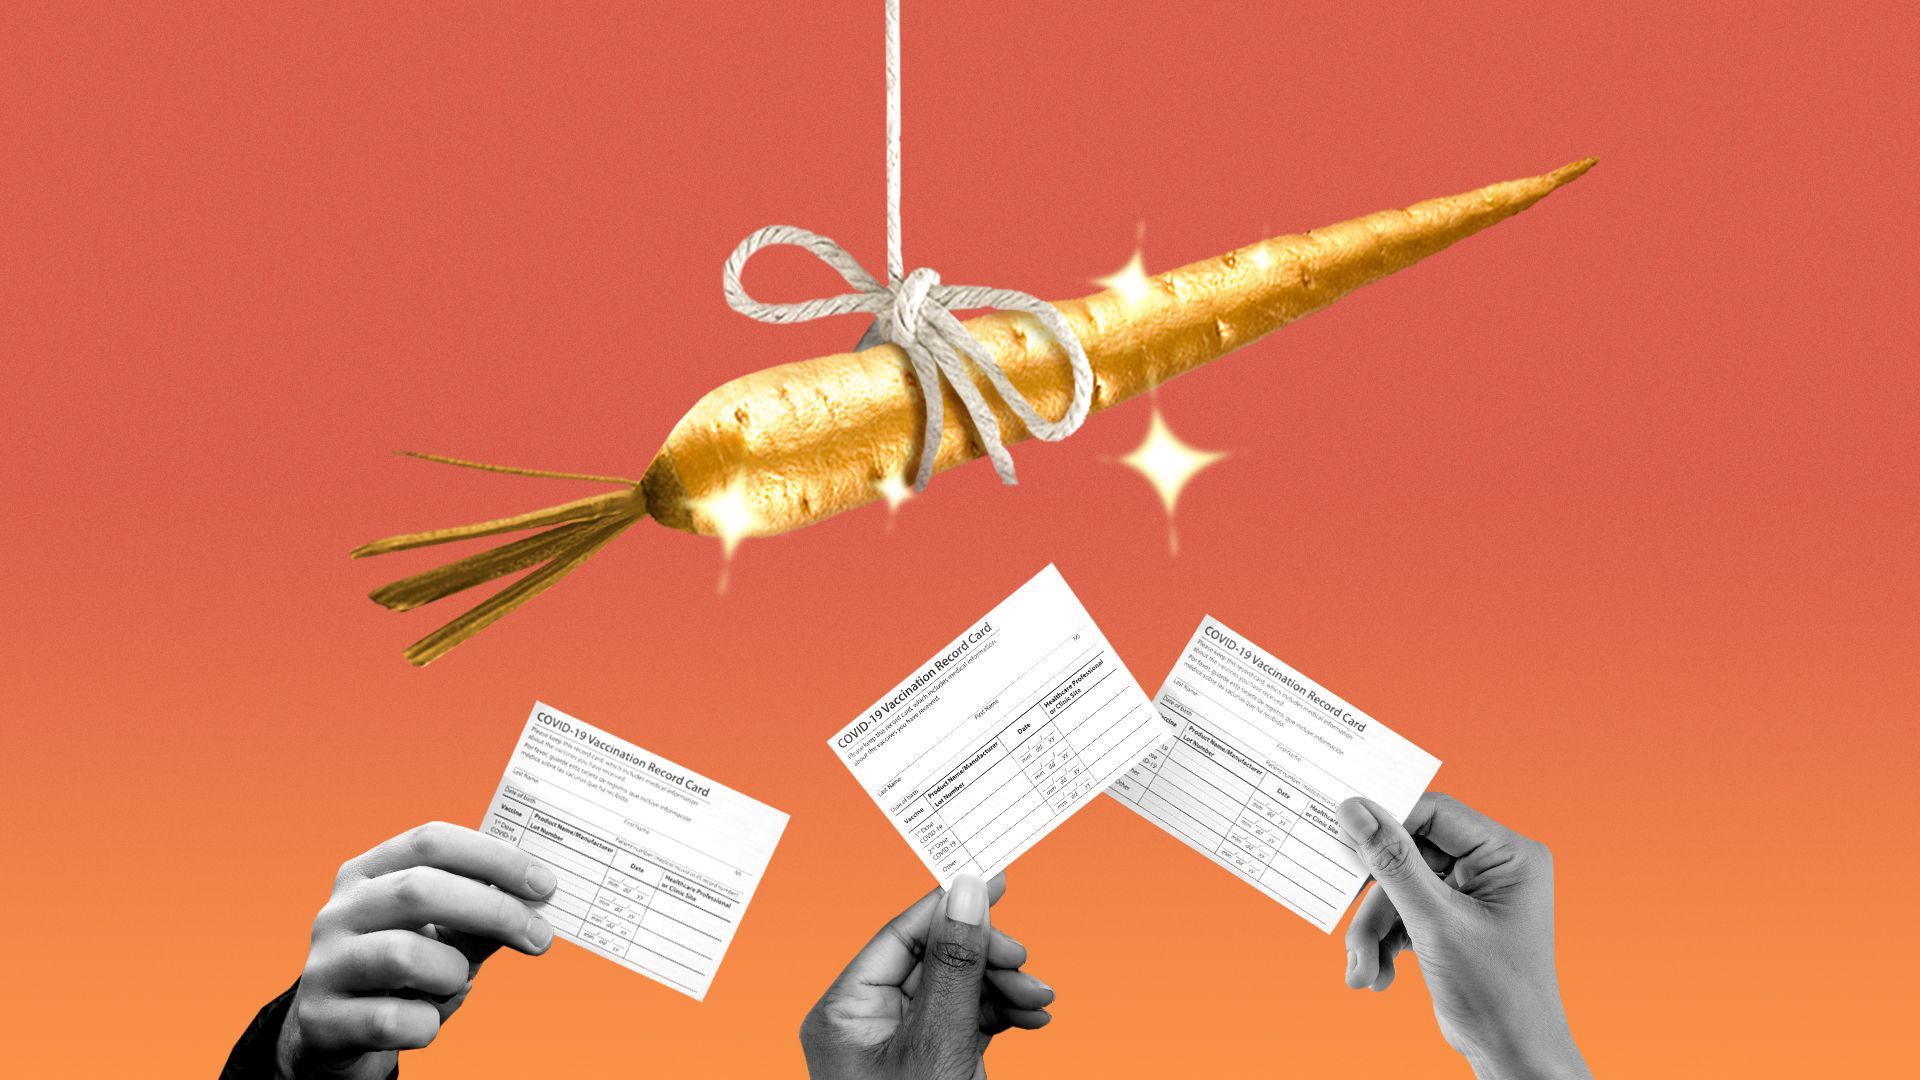 Illustration of three people's hands holding vaccine cards up towards a dangling golden carrot.